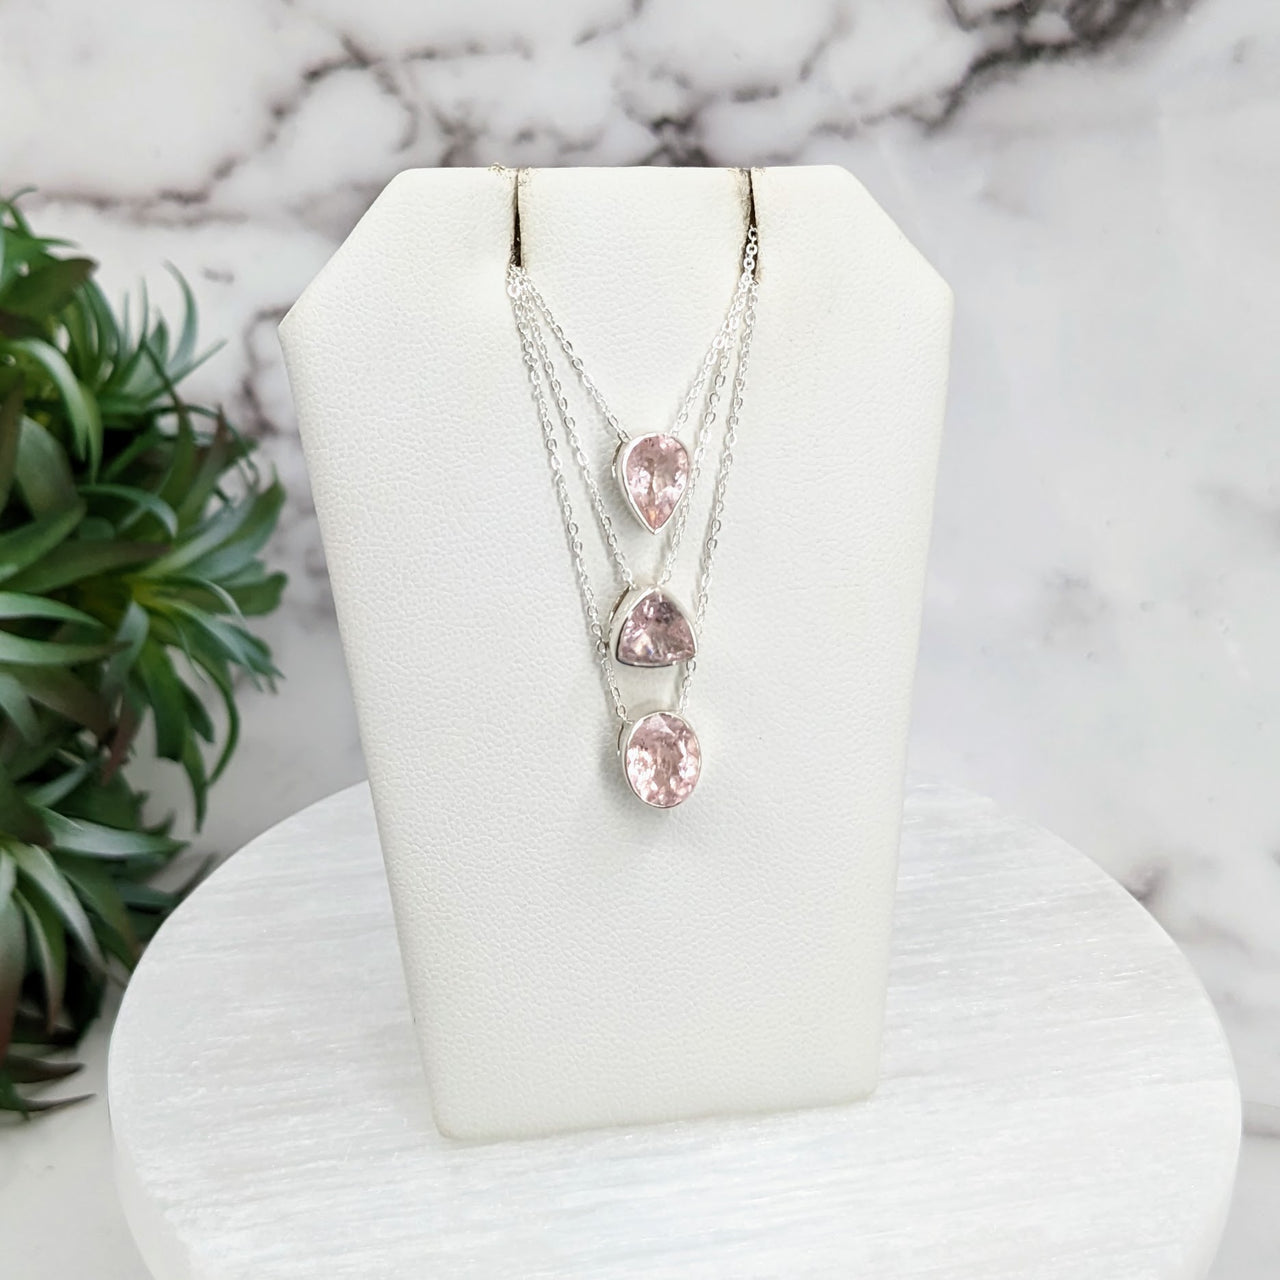 Pink Morganite Faceted Necklace Sterling Silver Slider Pendant on 18" Chain #LV3252